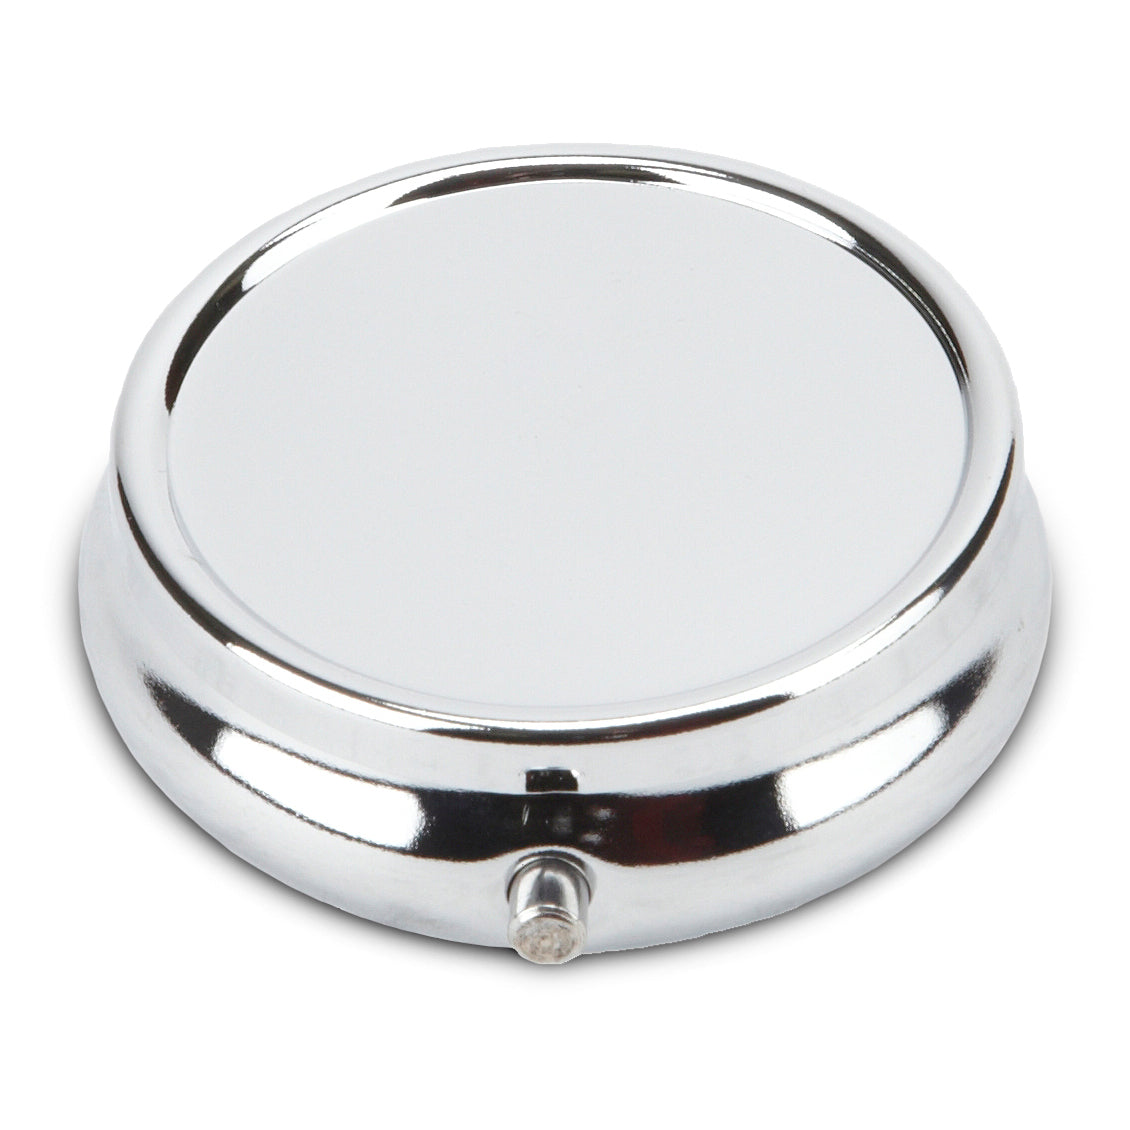 Custom One-day Round Metal Pill Box Case w/ 3 Compartments for Travel